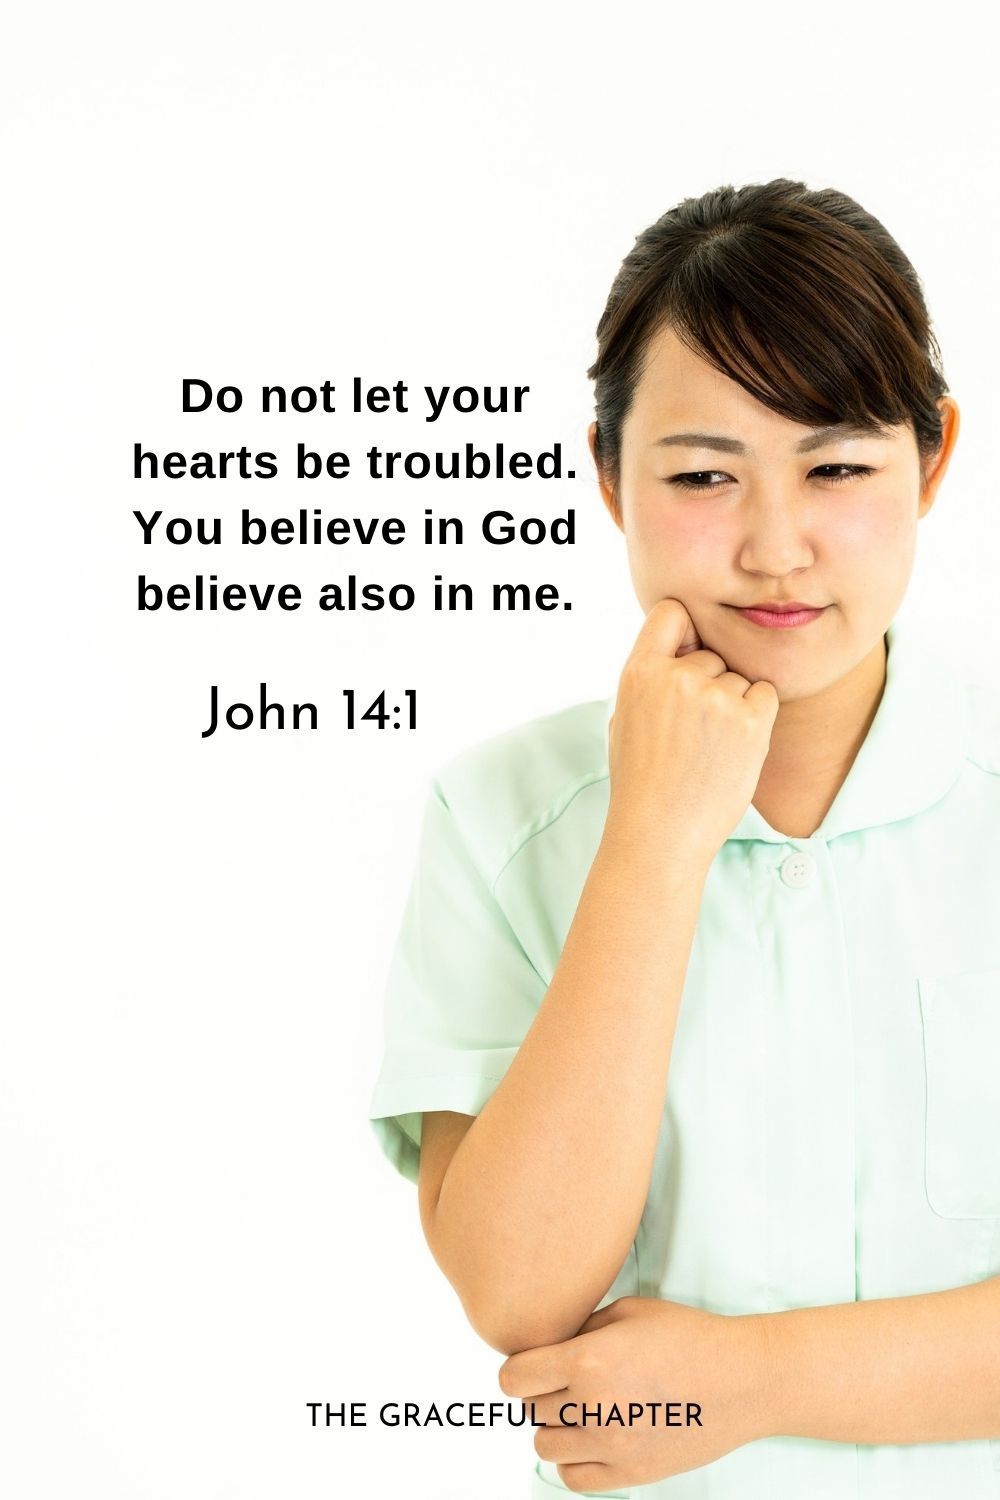 Do not let your hearts be troubled. You believe in God believe also in me.